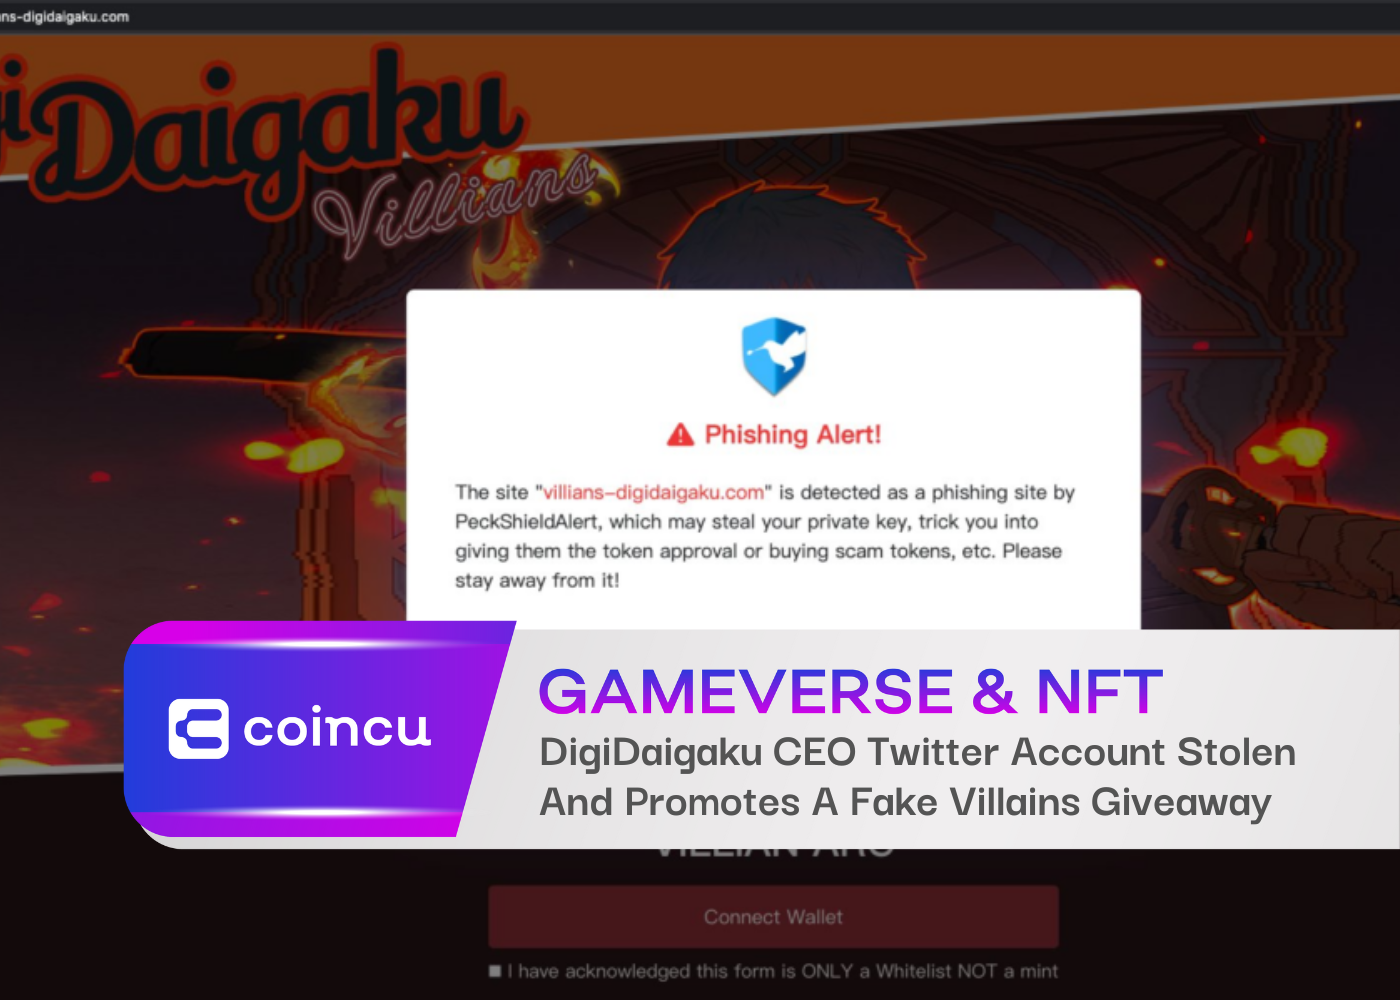 DigiDaigaku CEO Twitter Account Stolen And Promotes A Fake Villains Giveaway